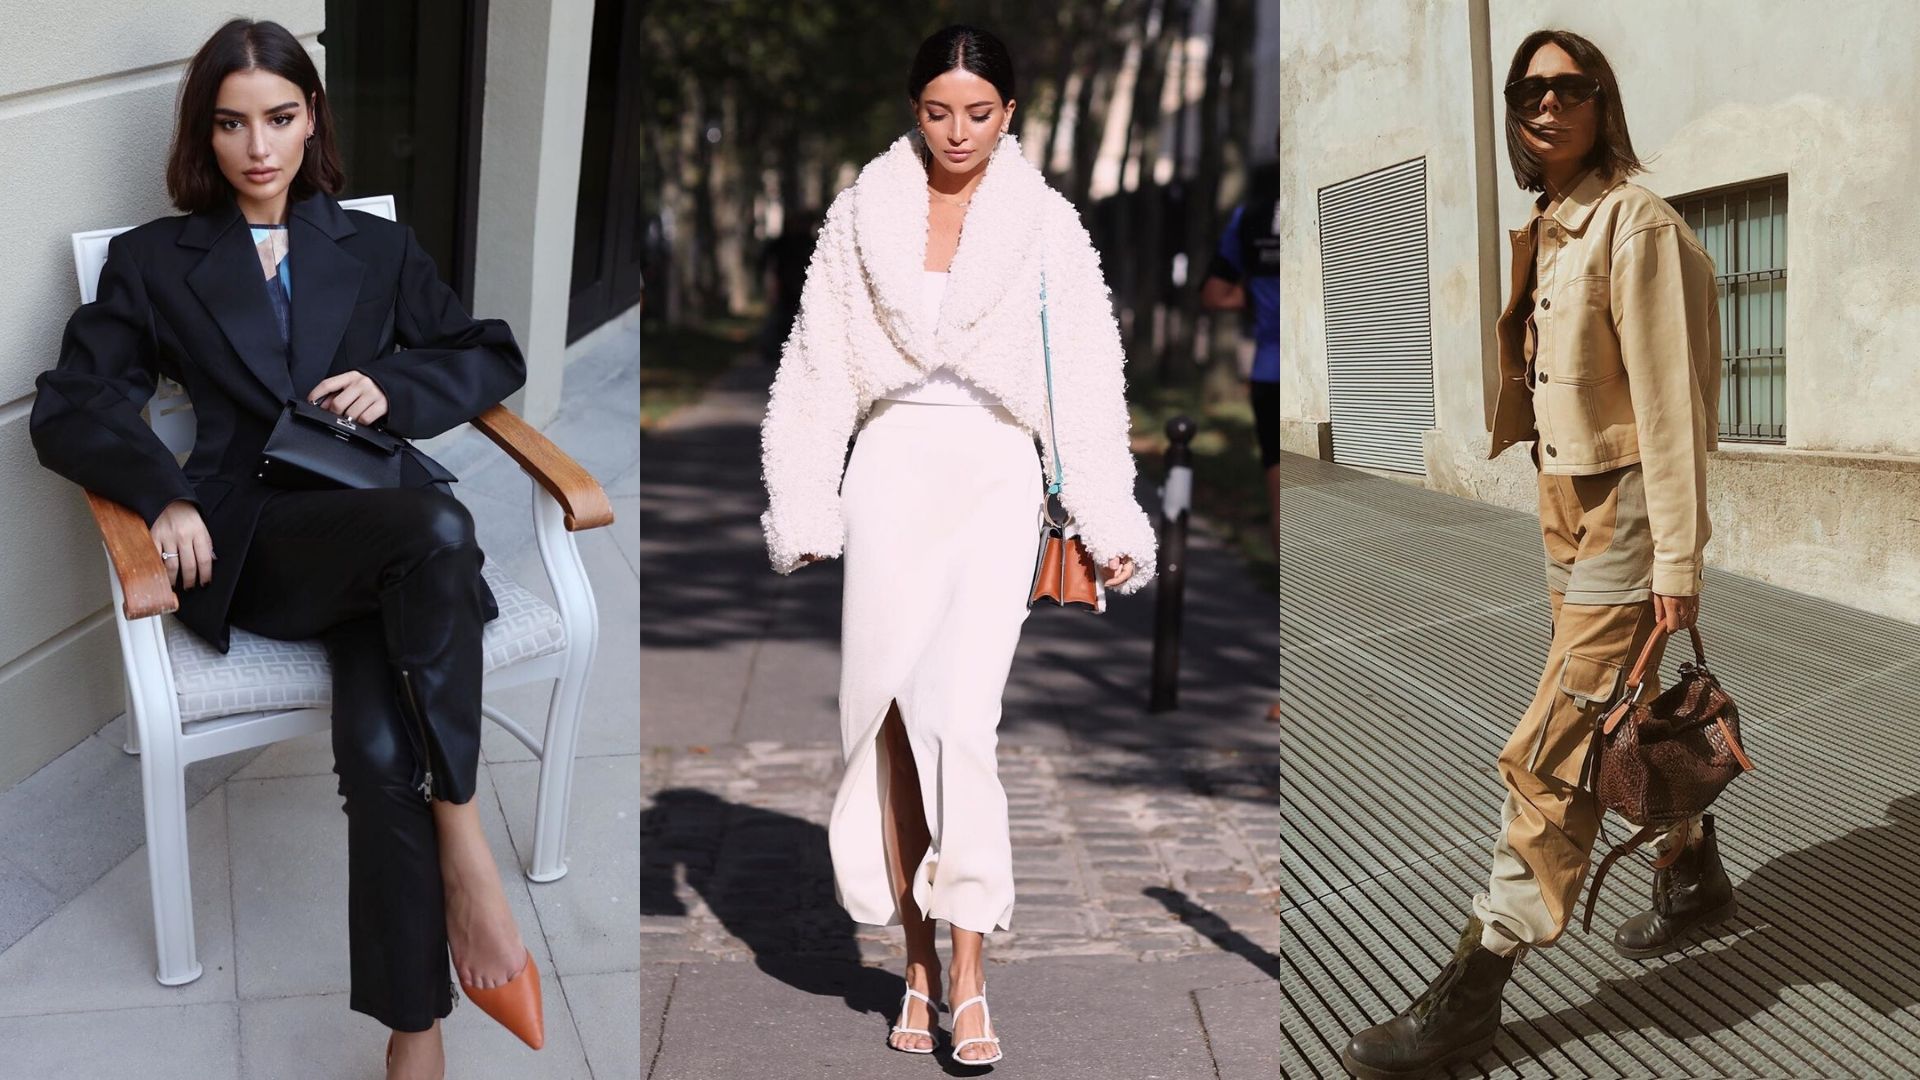 How To Dress For Winter, According To These Middle Eastern